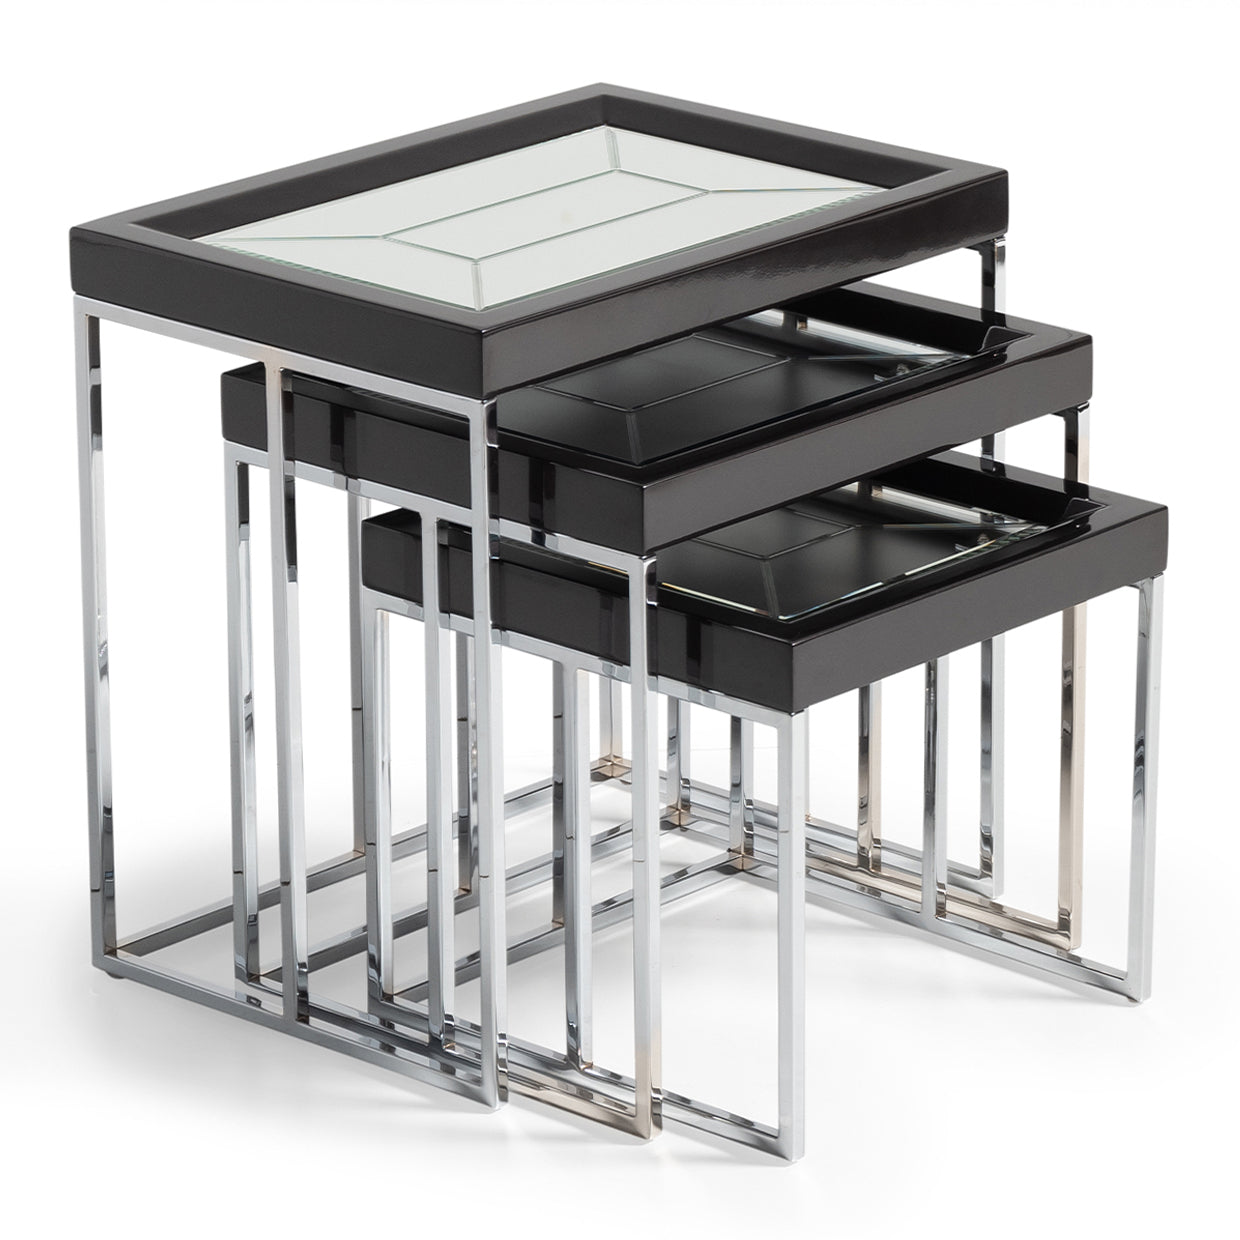 CARMELA, Nesting tables, Titanium gold finished leg, Glossy Charcoal Sand, Mirror inlays, Opulence, Glamour, Attention to detail, Decorative pieces, Versatile, Stunning design, Exceptional functionality, Luxury living space, michael amini